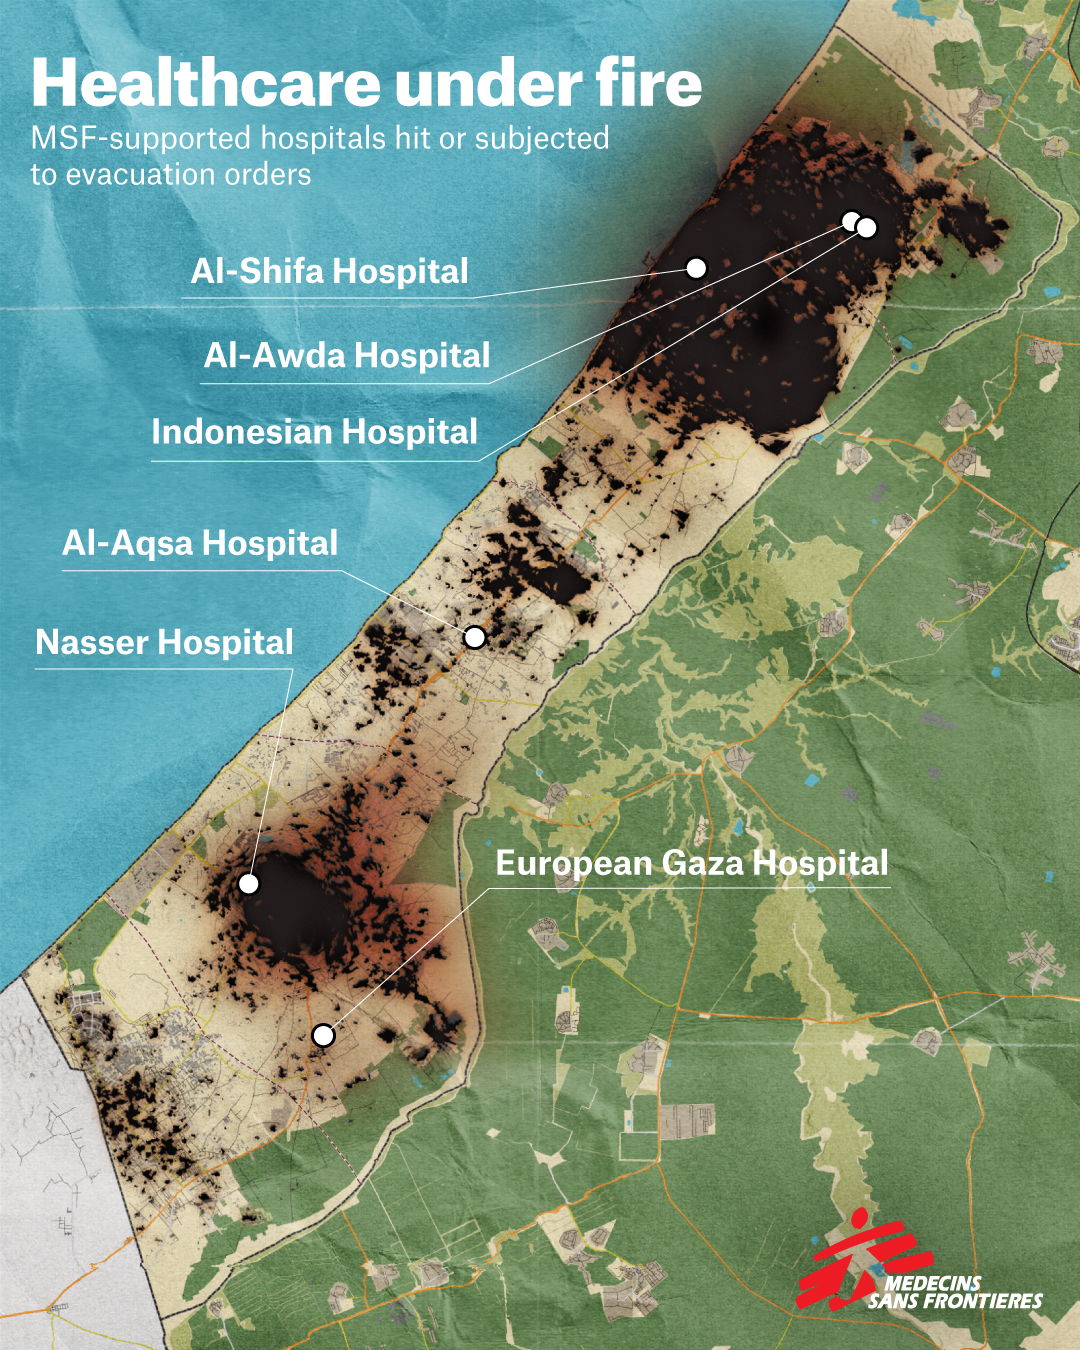  Map shows hospitals in Gaza under fire